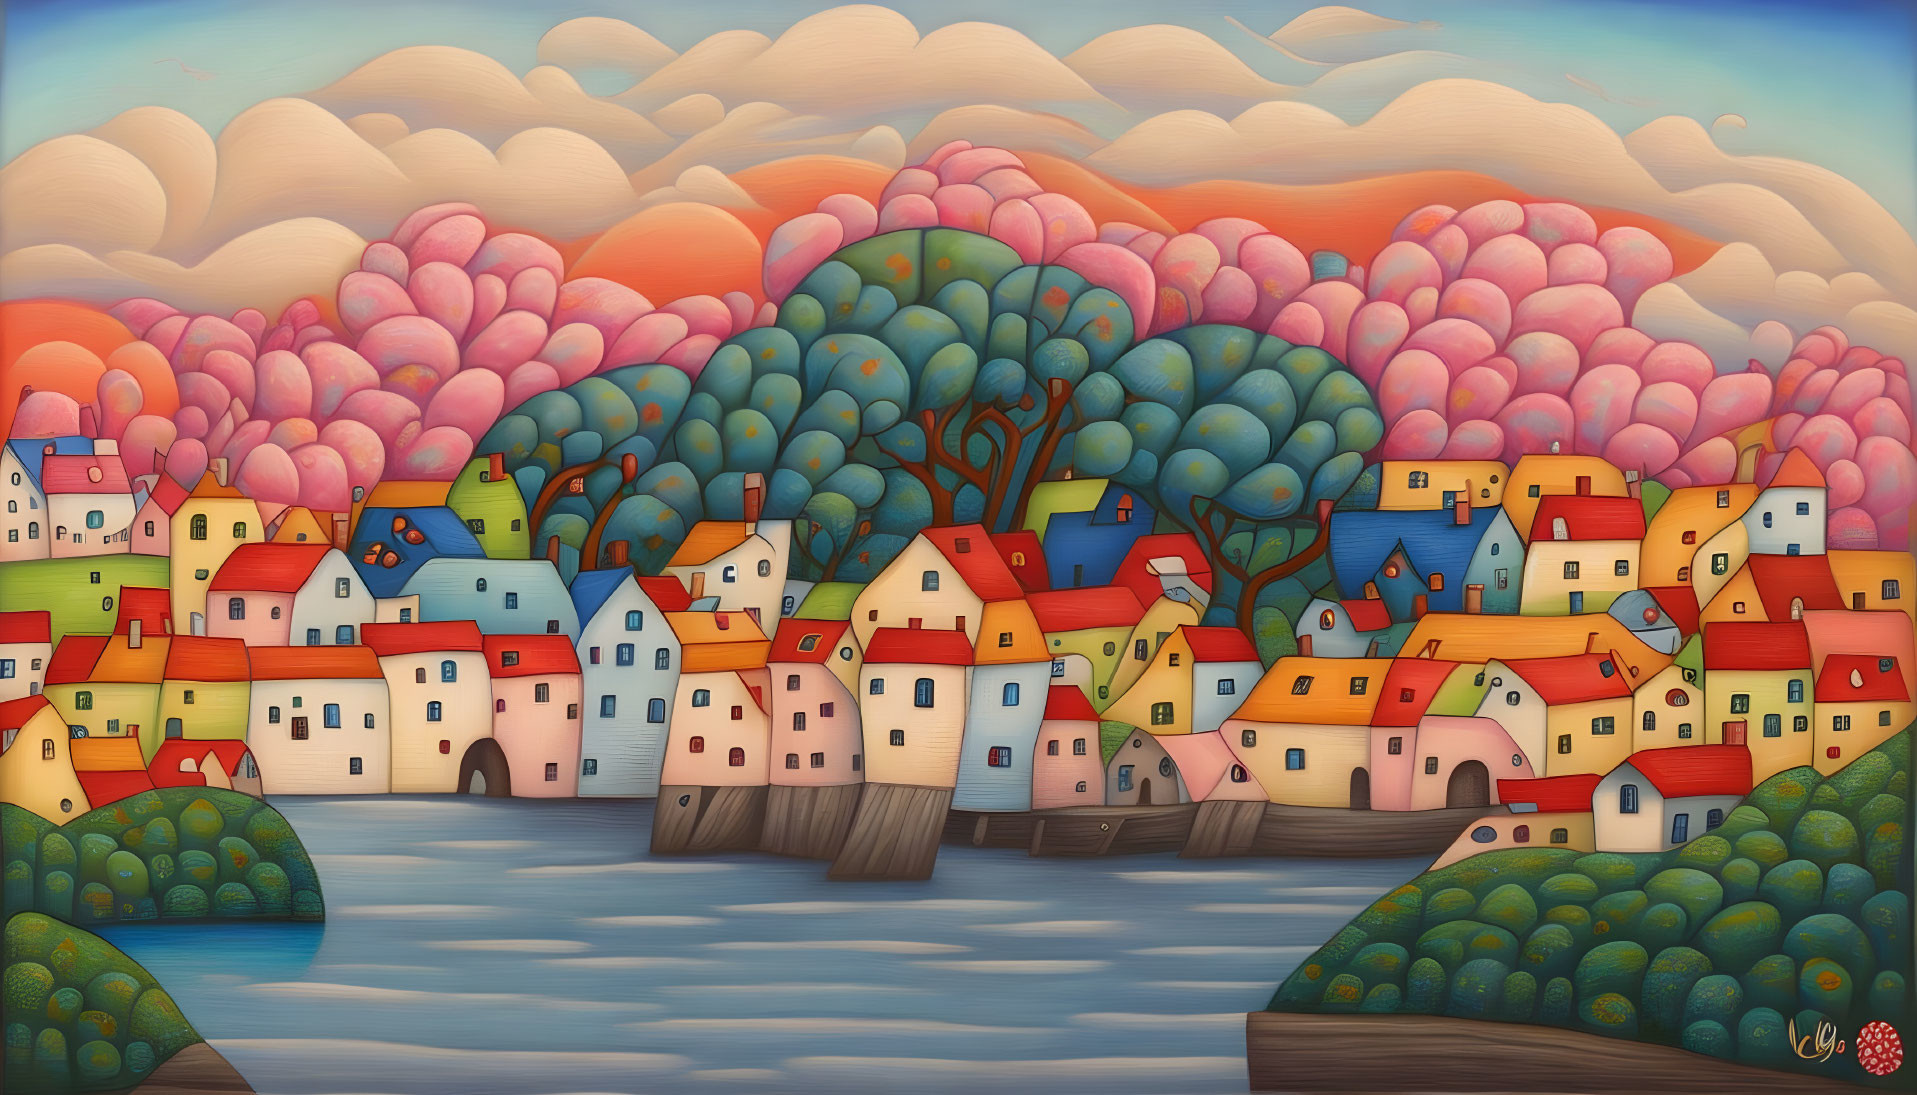 Vibrant Village Landscape with Colorful Houses, River, and Pastel Trees